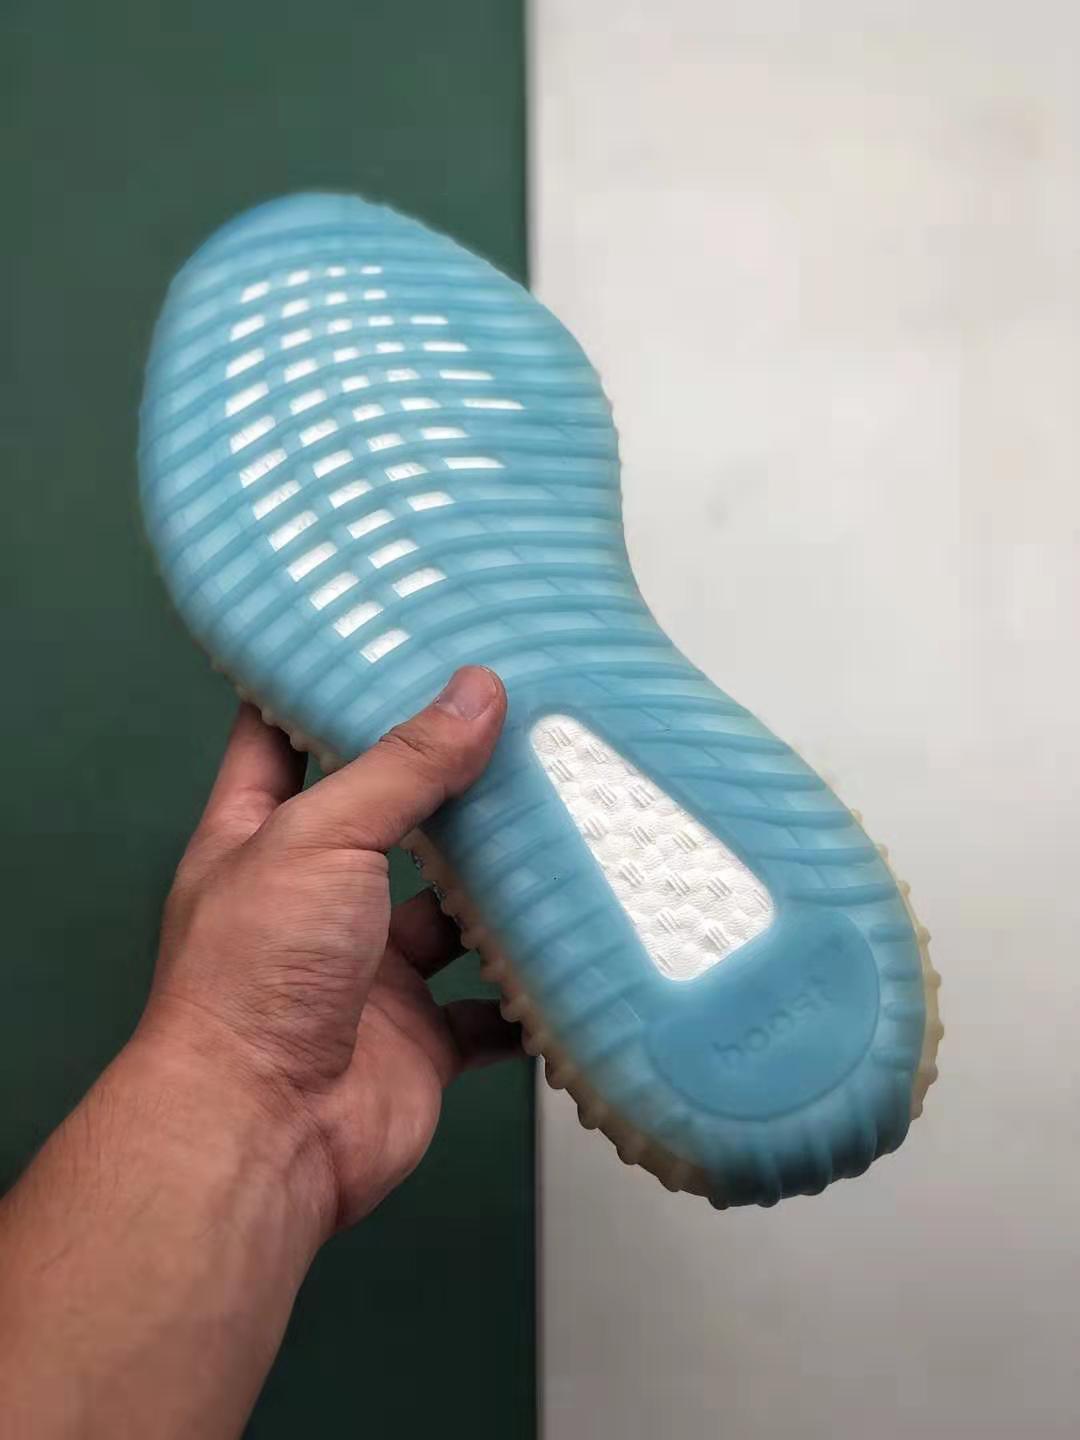 Adidas Yeezy Boost 350 V2 Ice Blue CI1173 - Limited Edition Sneakers